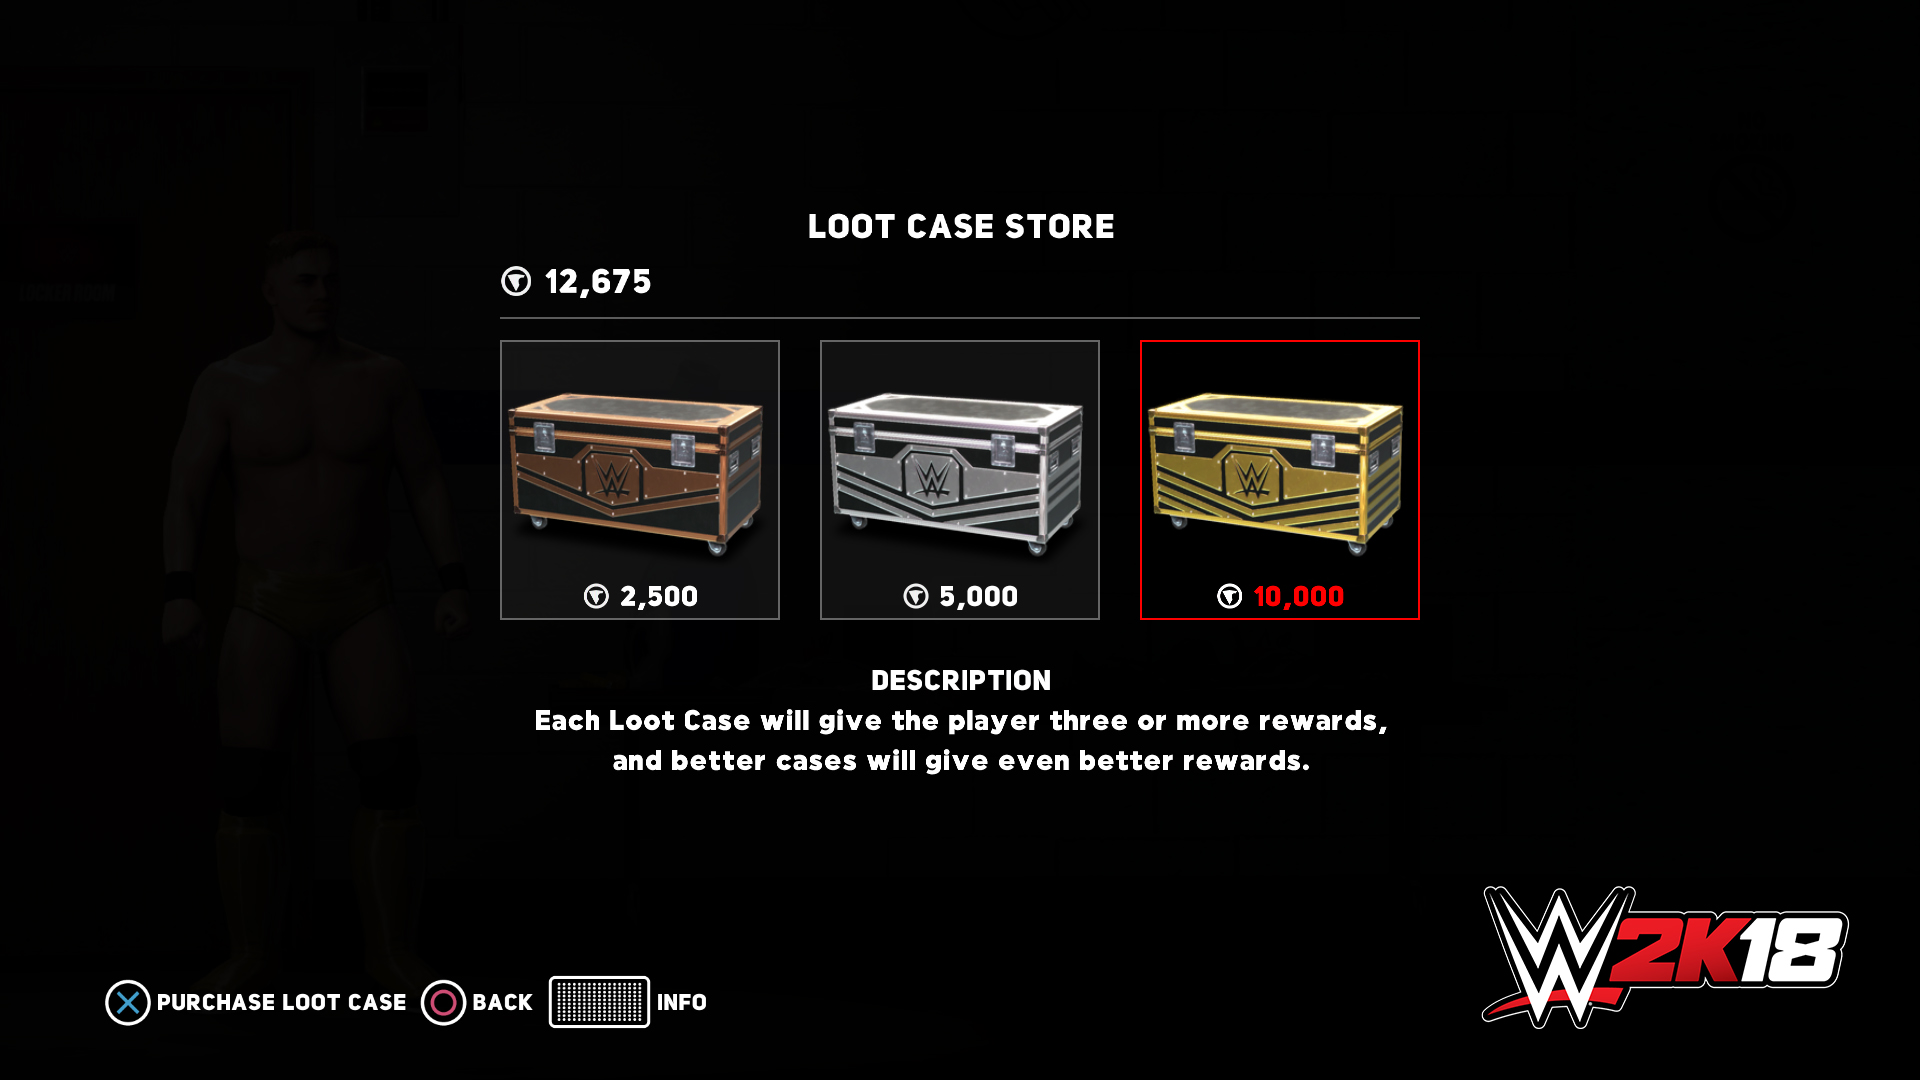 MyPLAYER Loot Case Store